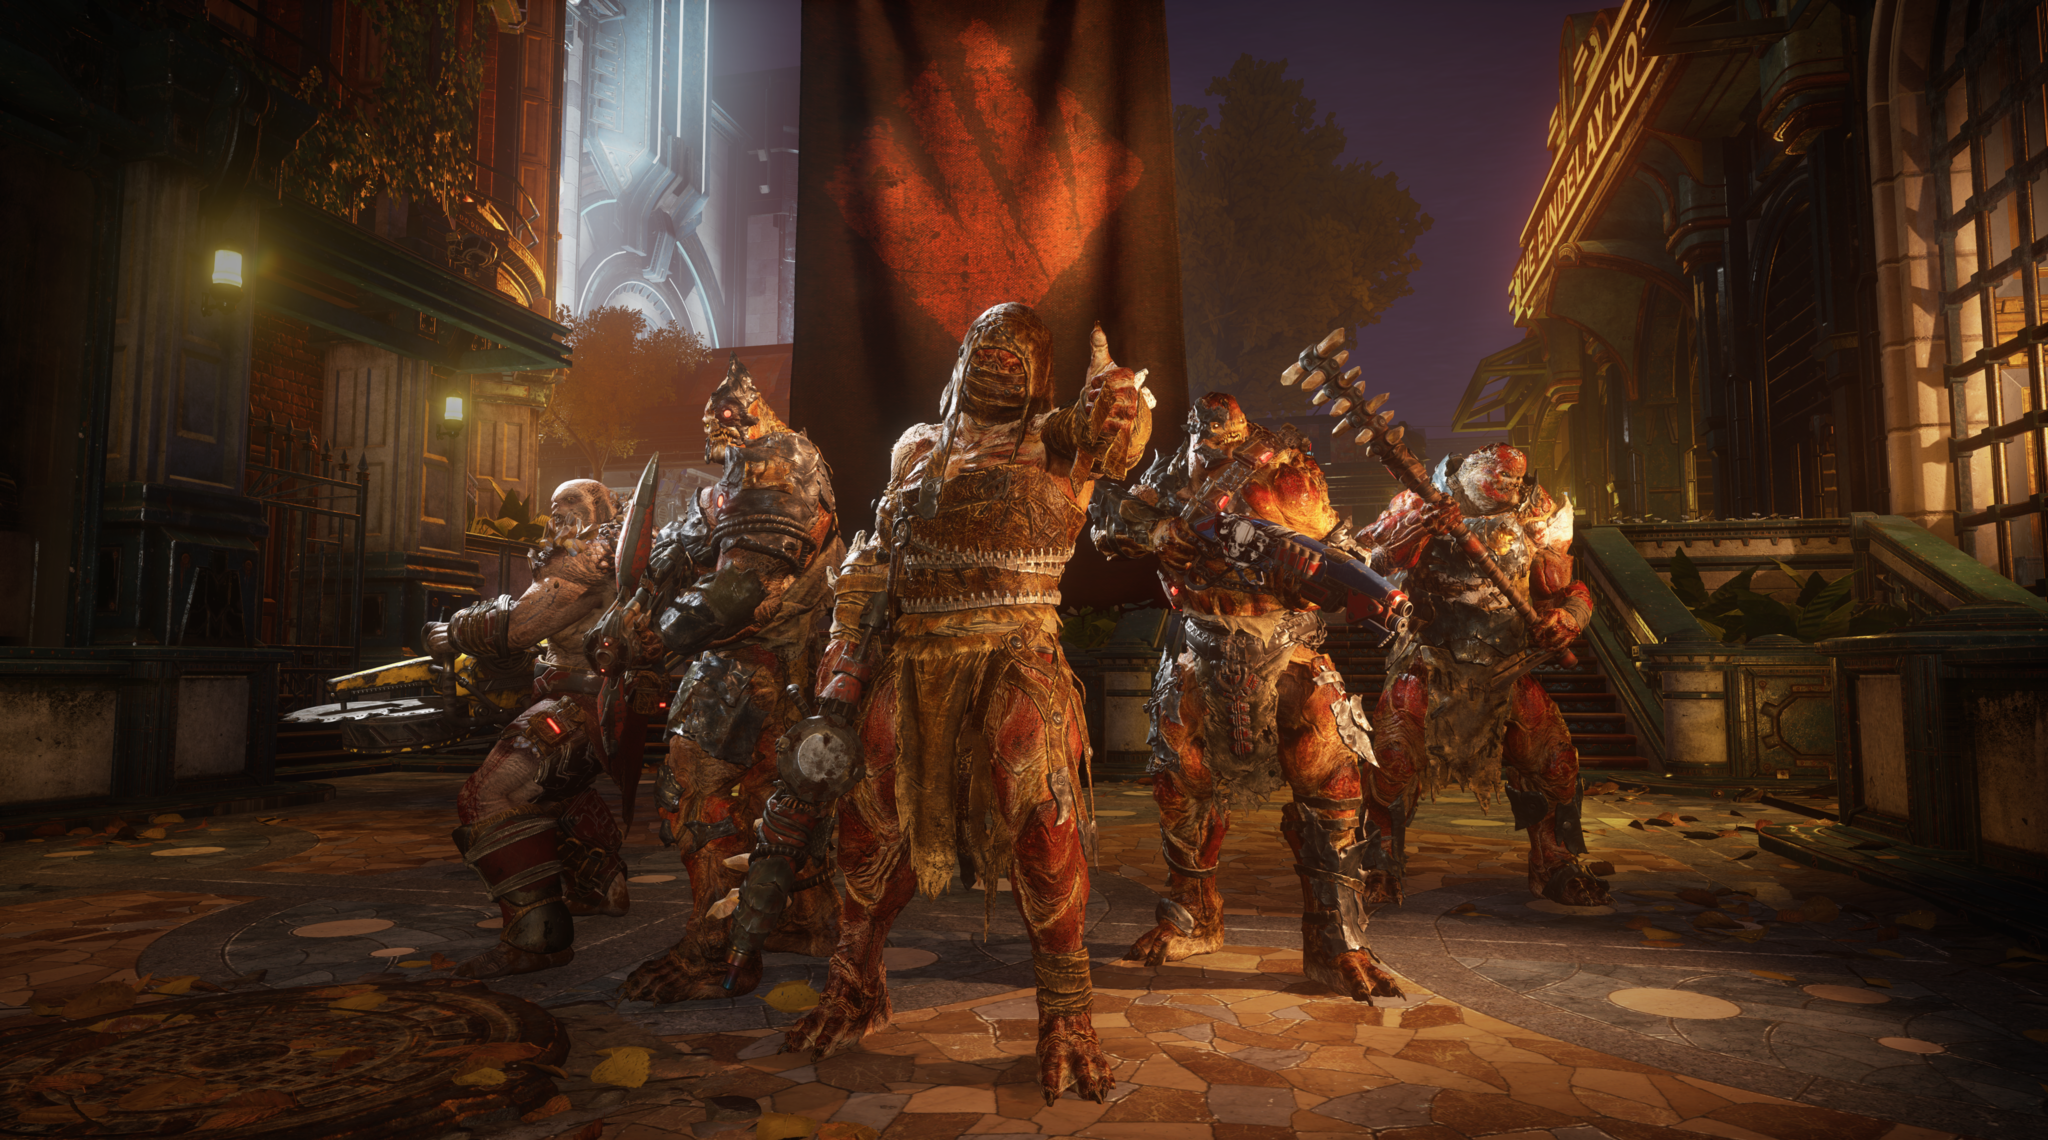 It was the right choice': how the Gears 5 team built a credible